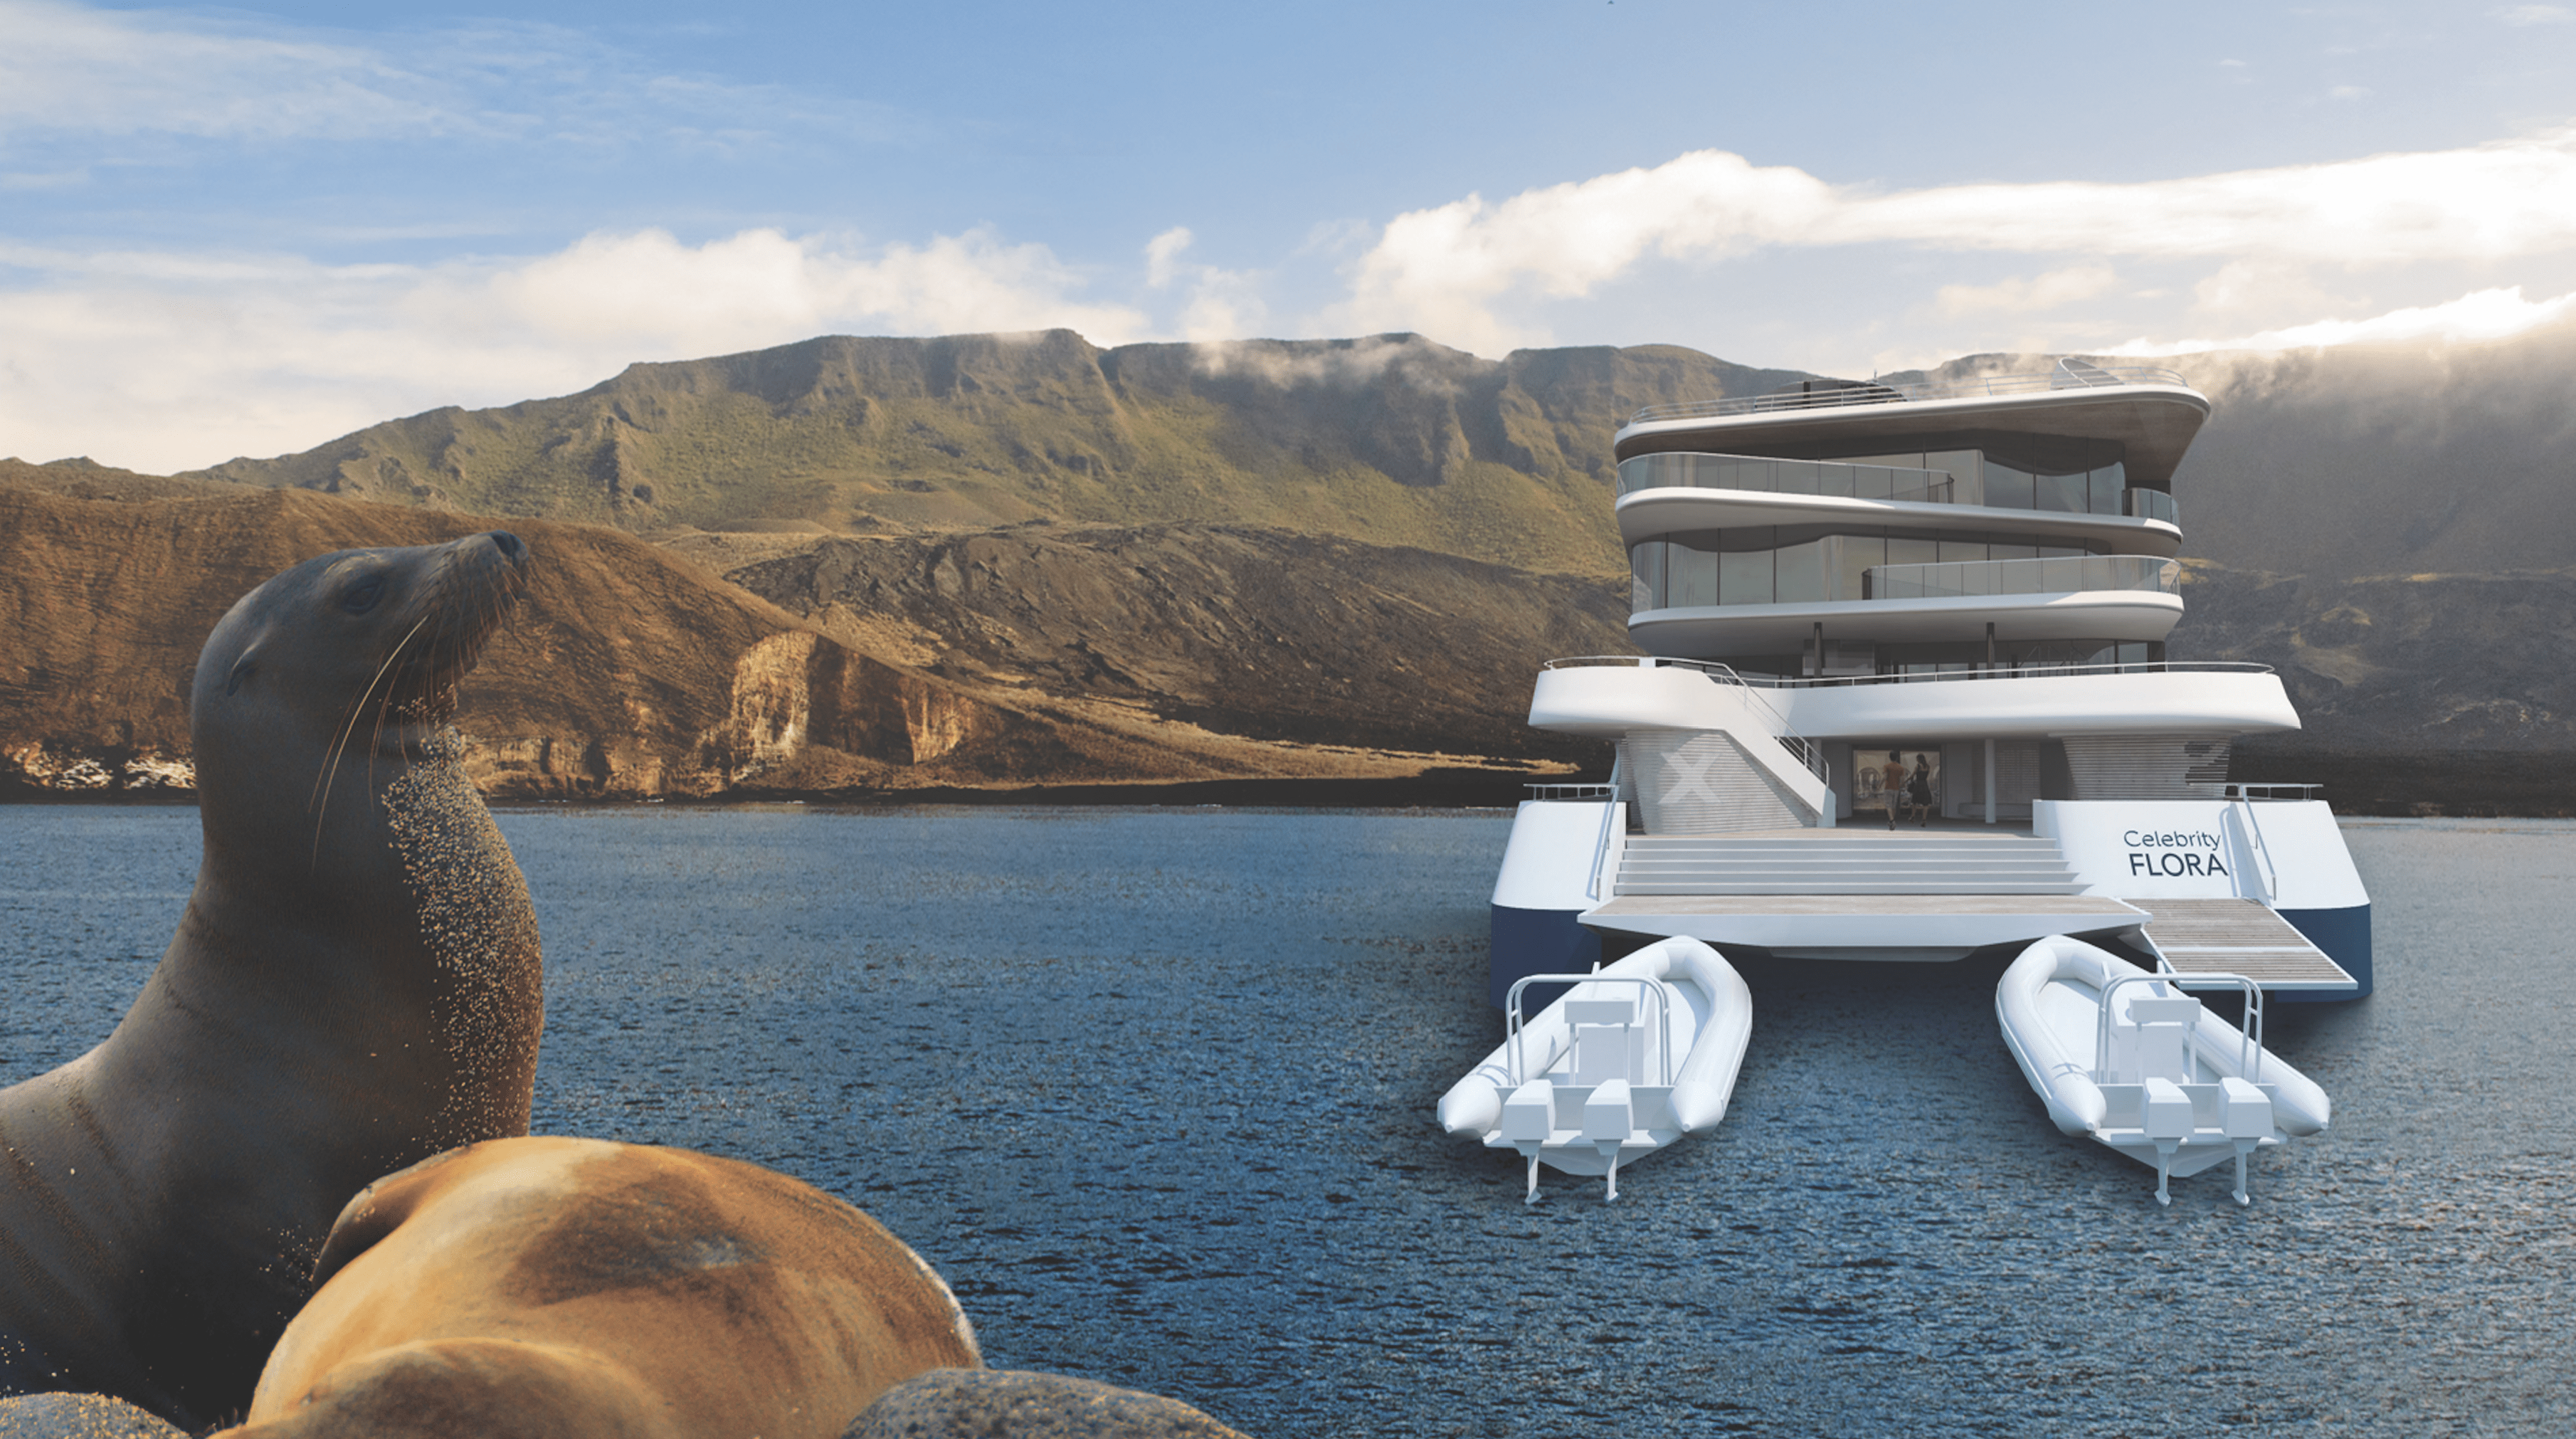 Celebrity Cruises to build expedition ship for the Galapagos